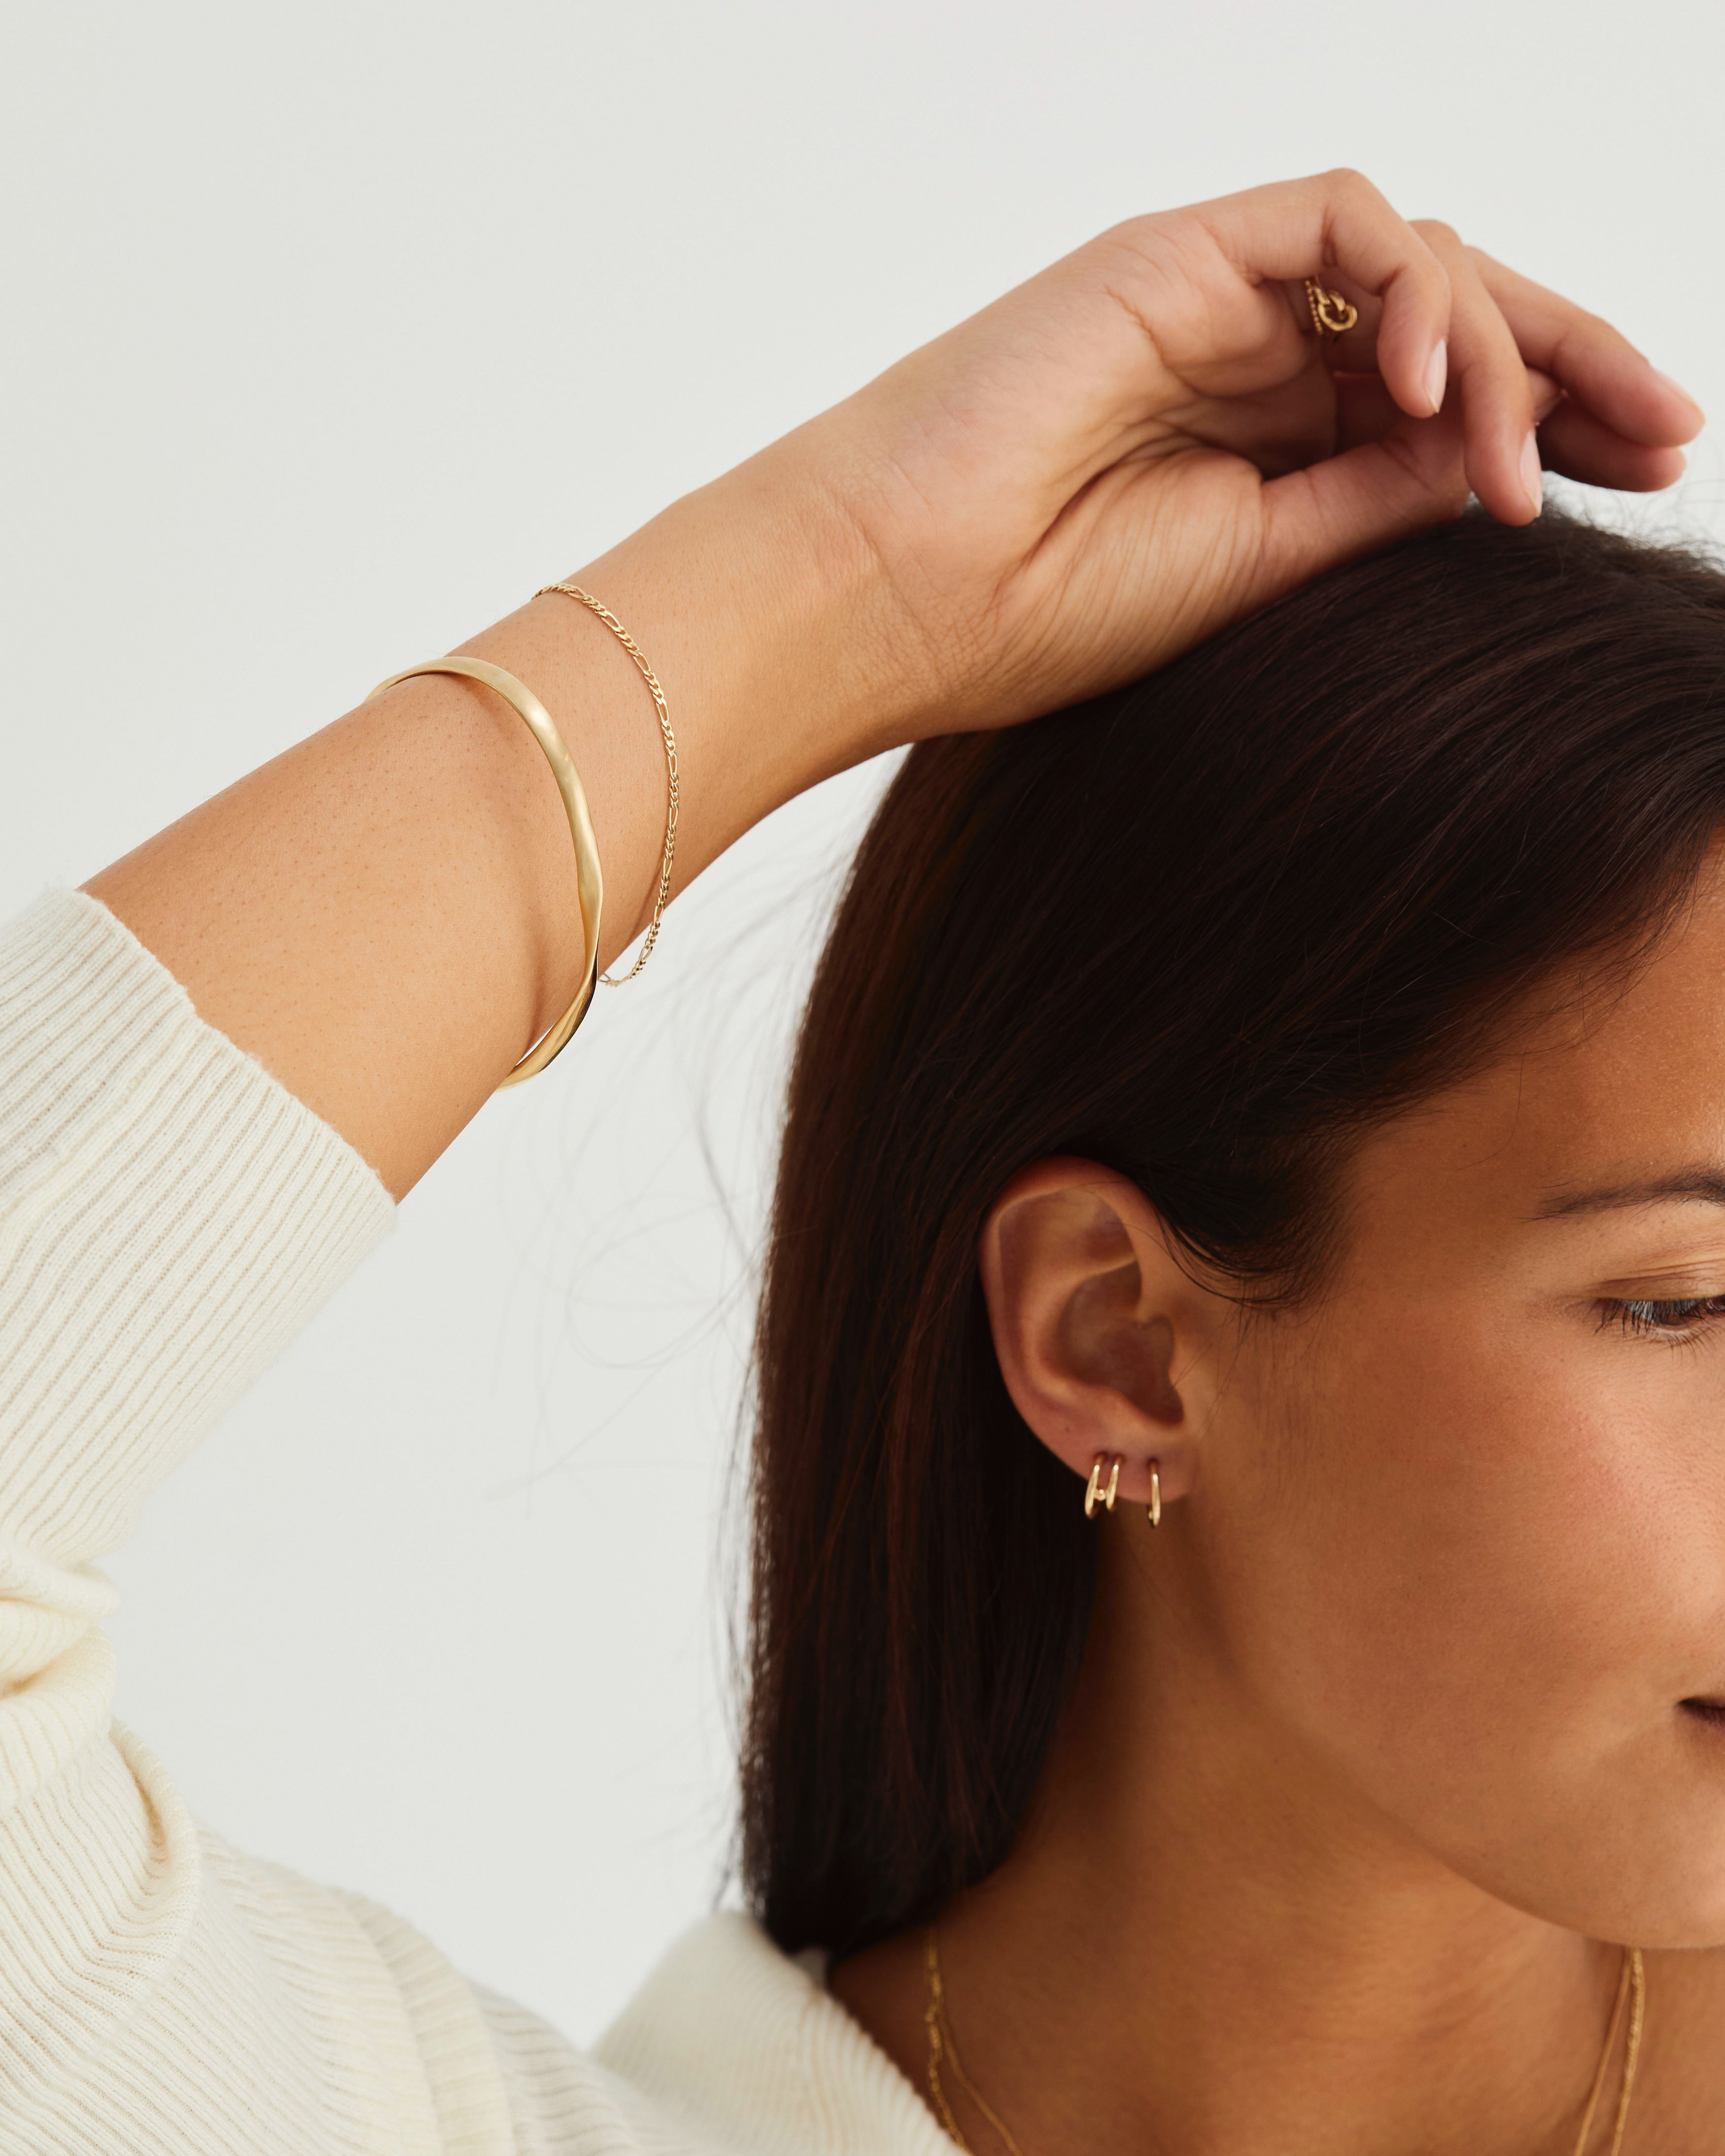 A woman wearing the Ellipse / Shift Bangle in yellow gold.